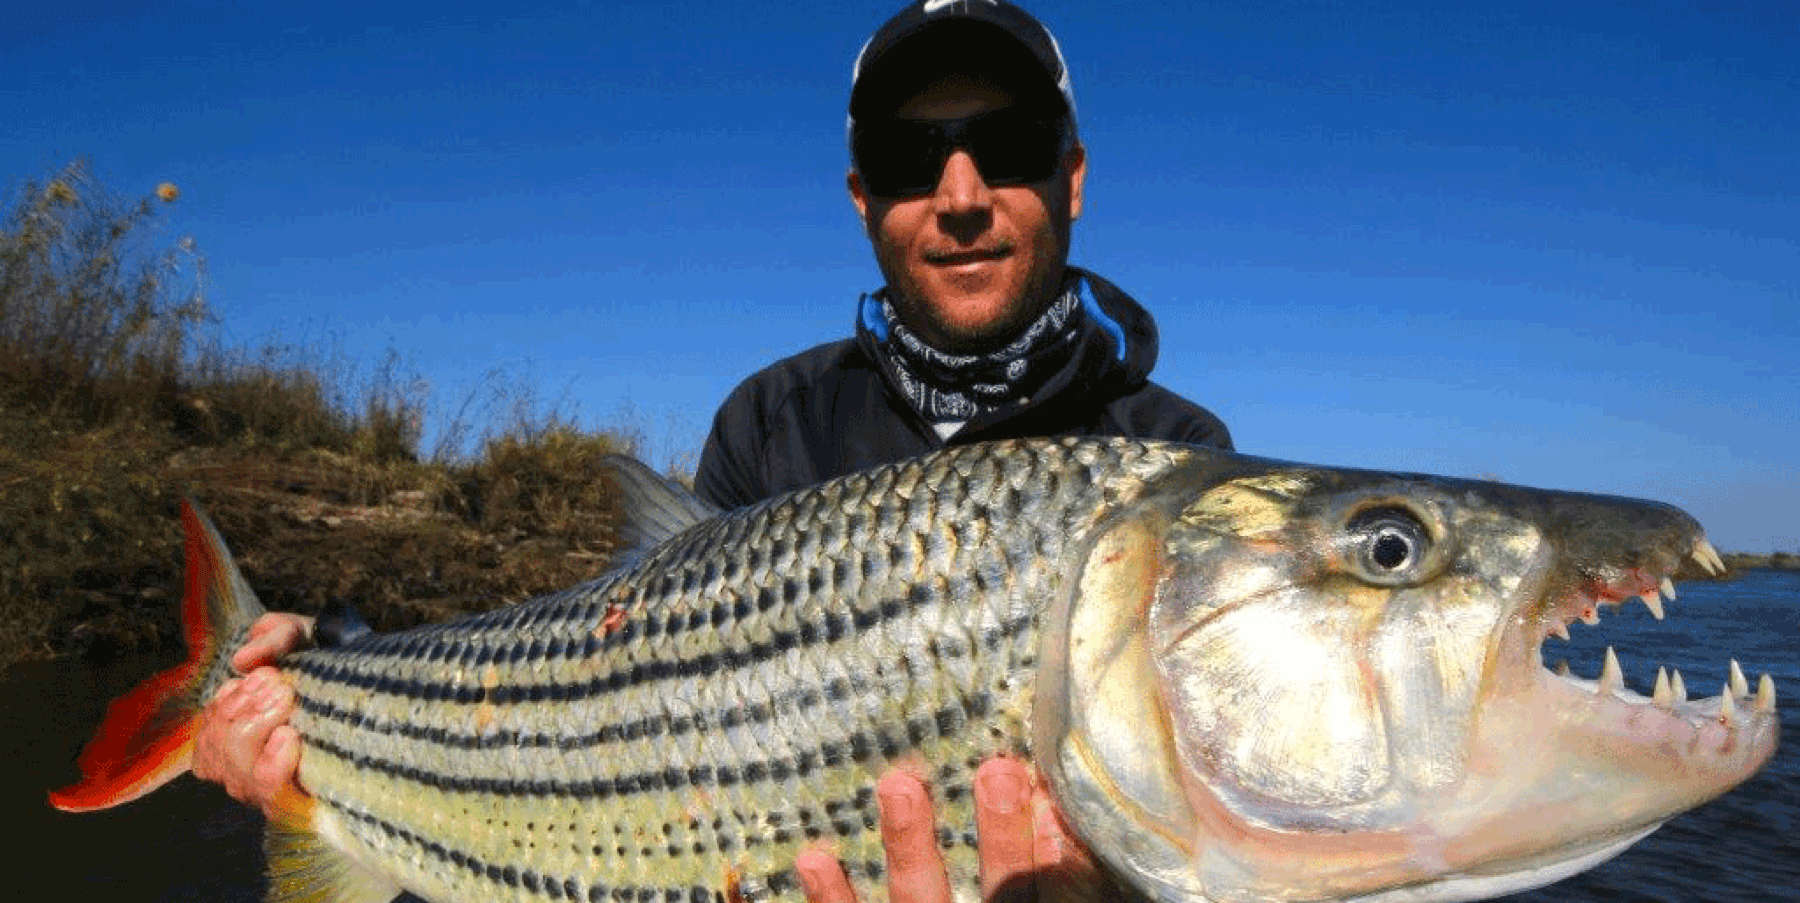 Tiger ffishing is a favourite pastime in Botswana